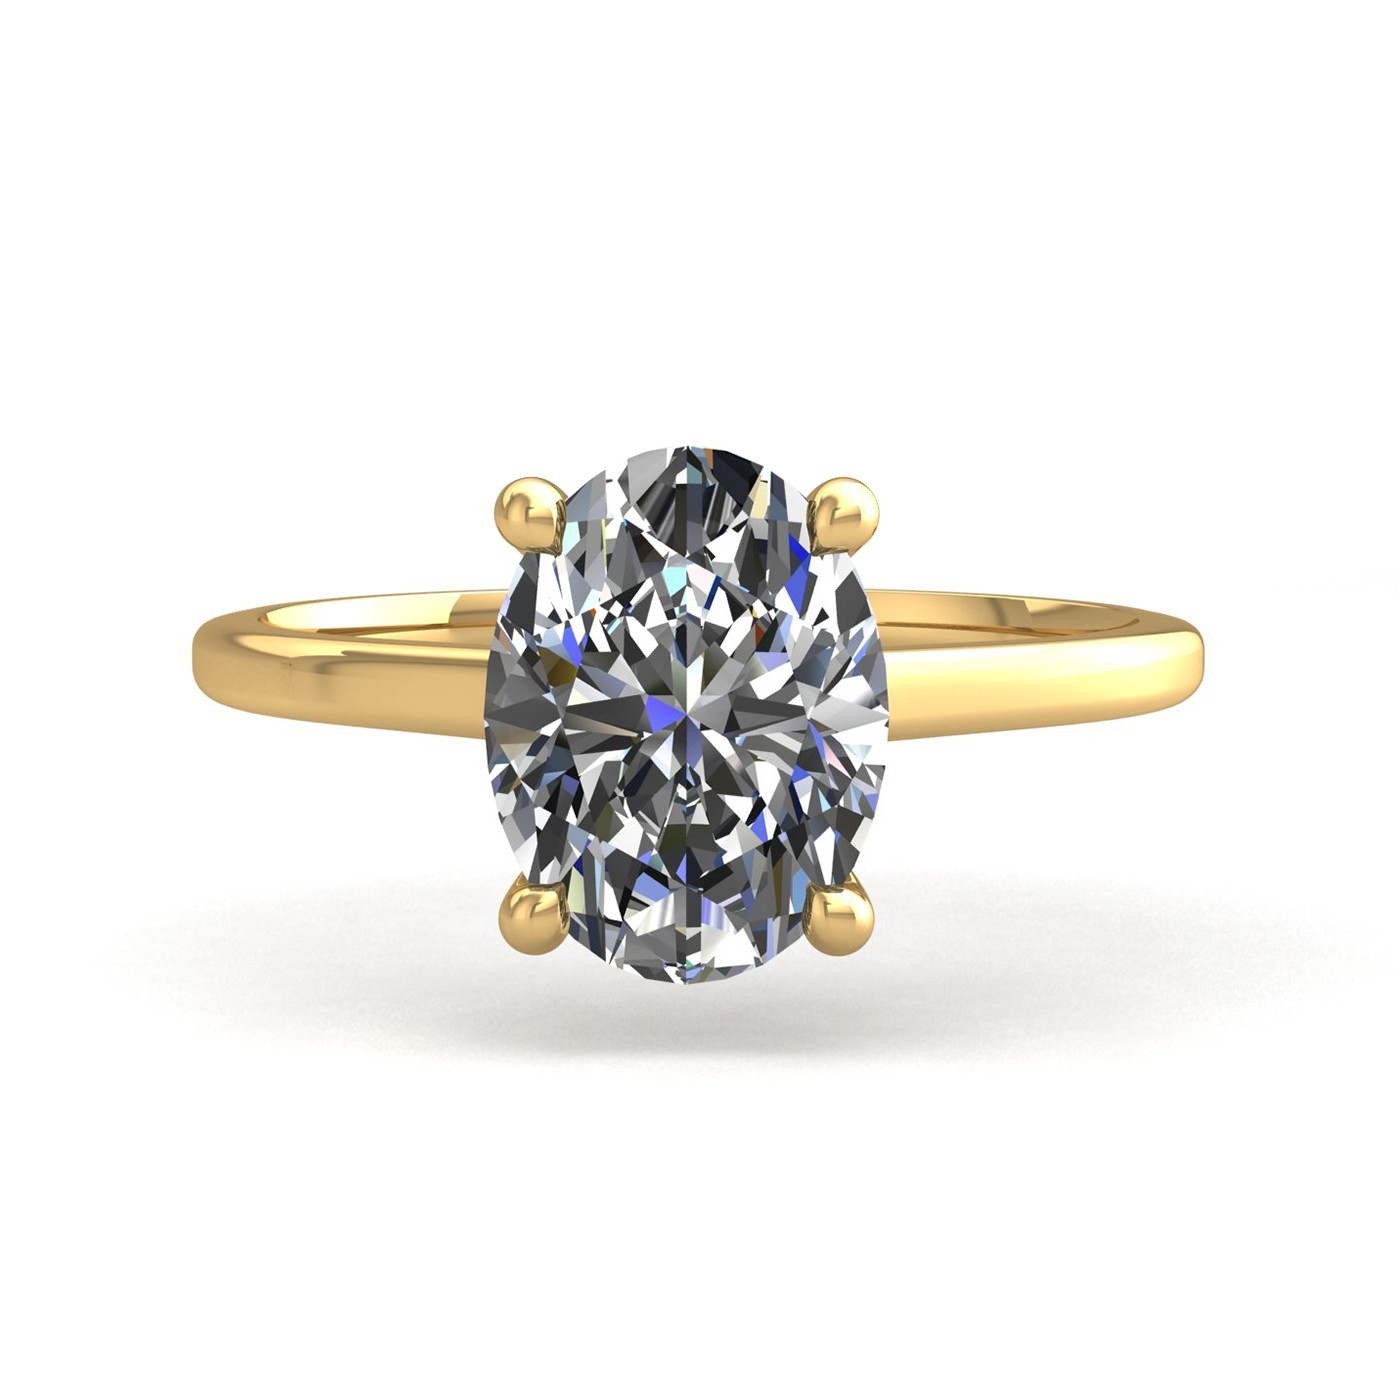 18k yellow gold  0,50 ct 4 prongs solitaire oval cut diamond engagement ring with whisper thin band Photos & images